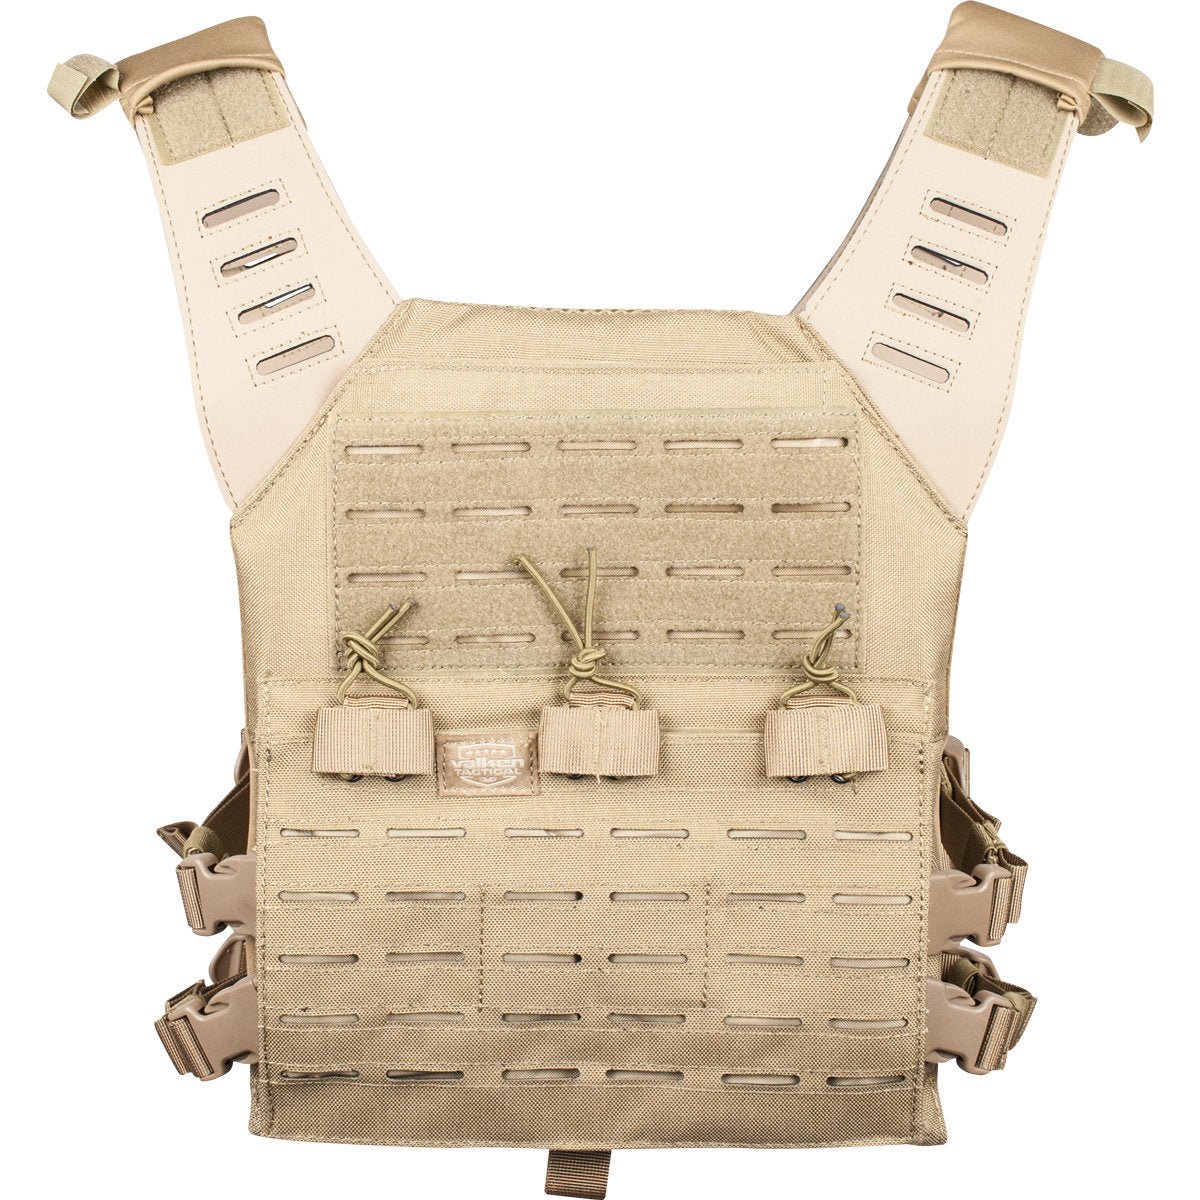 Laser Cut MOLLE Plate Carrier w/ Integrated Mag Pouches - Jefe's Airsoft SolutionsgeargreenMAP